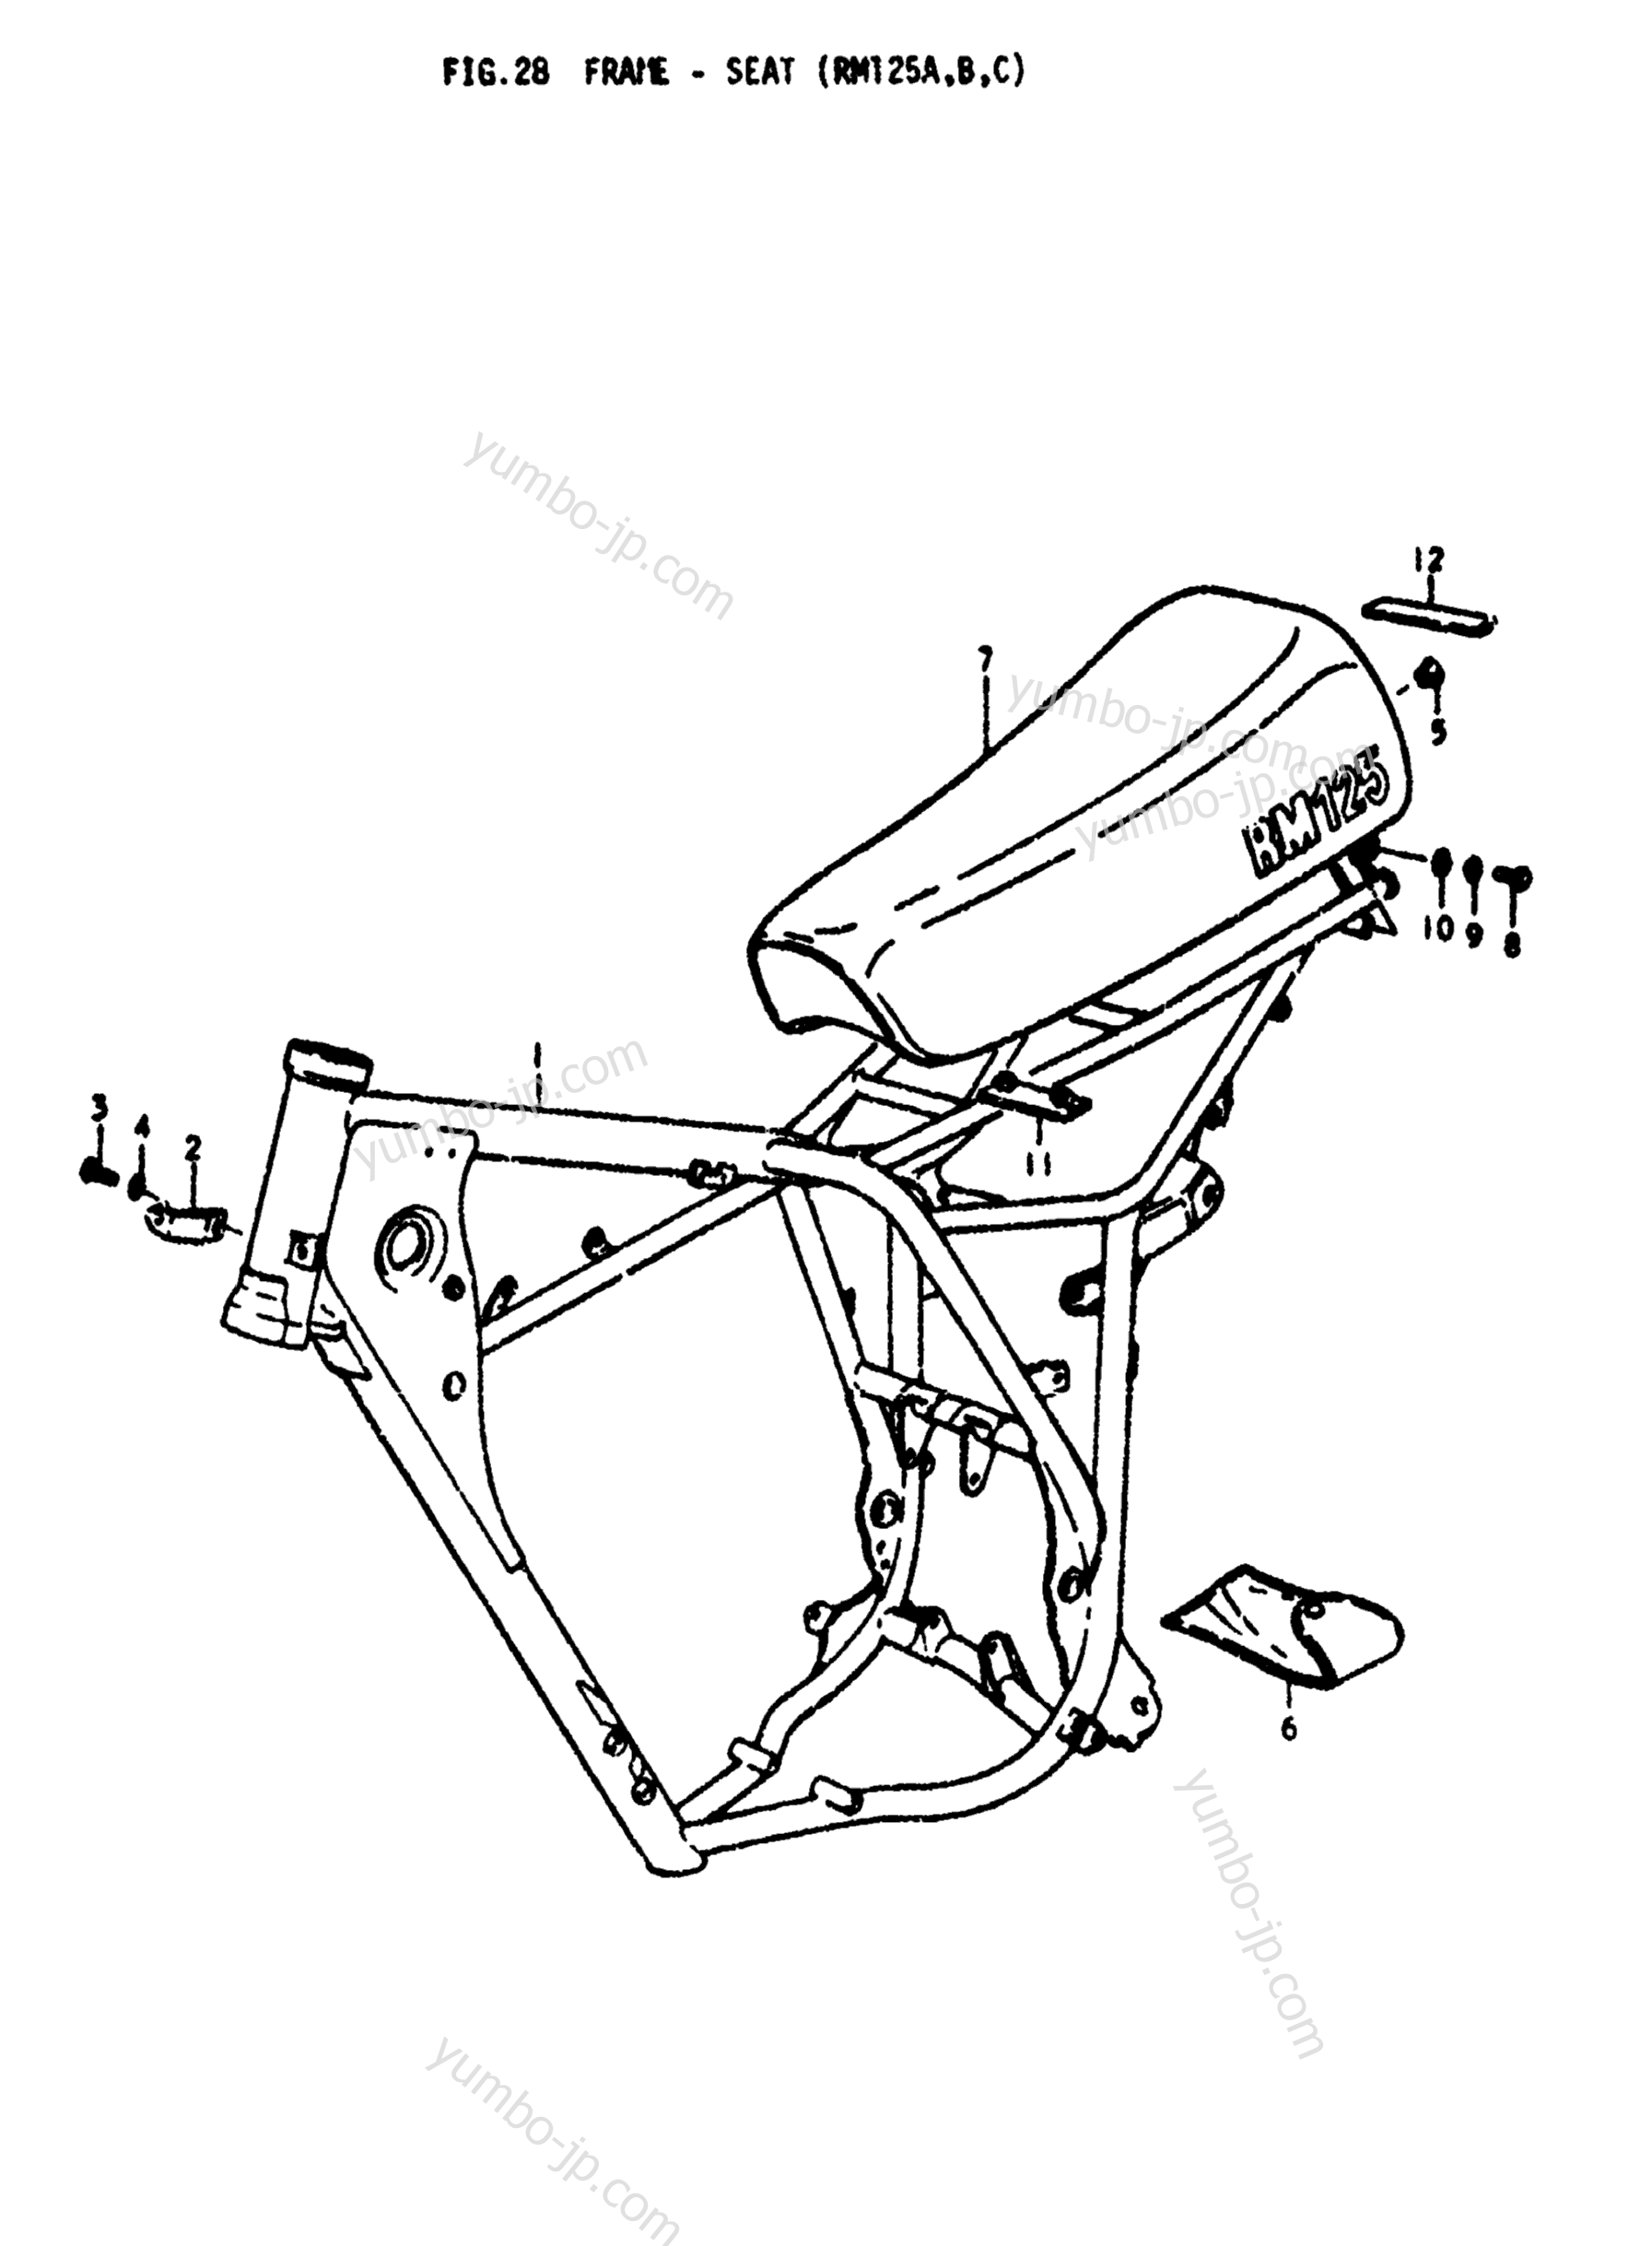 FRAME - SEAT (RM125A for motorcycles SUZUKI RM125 1976 year